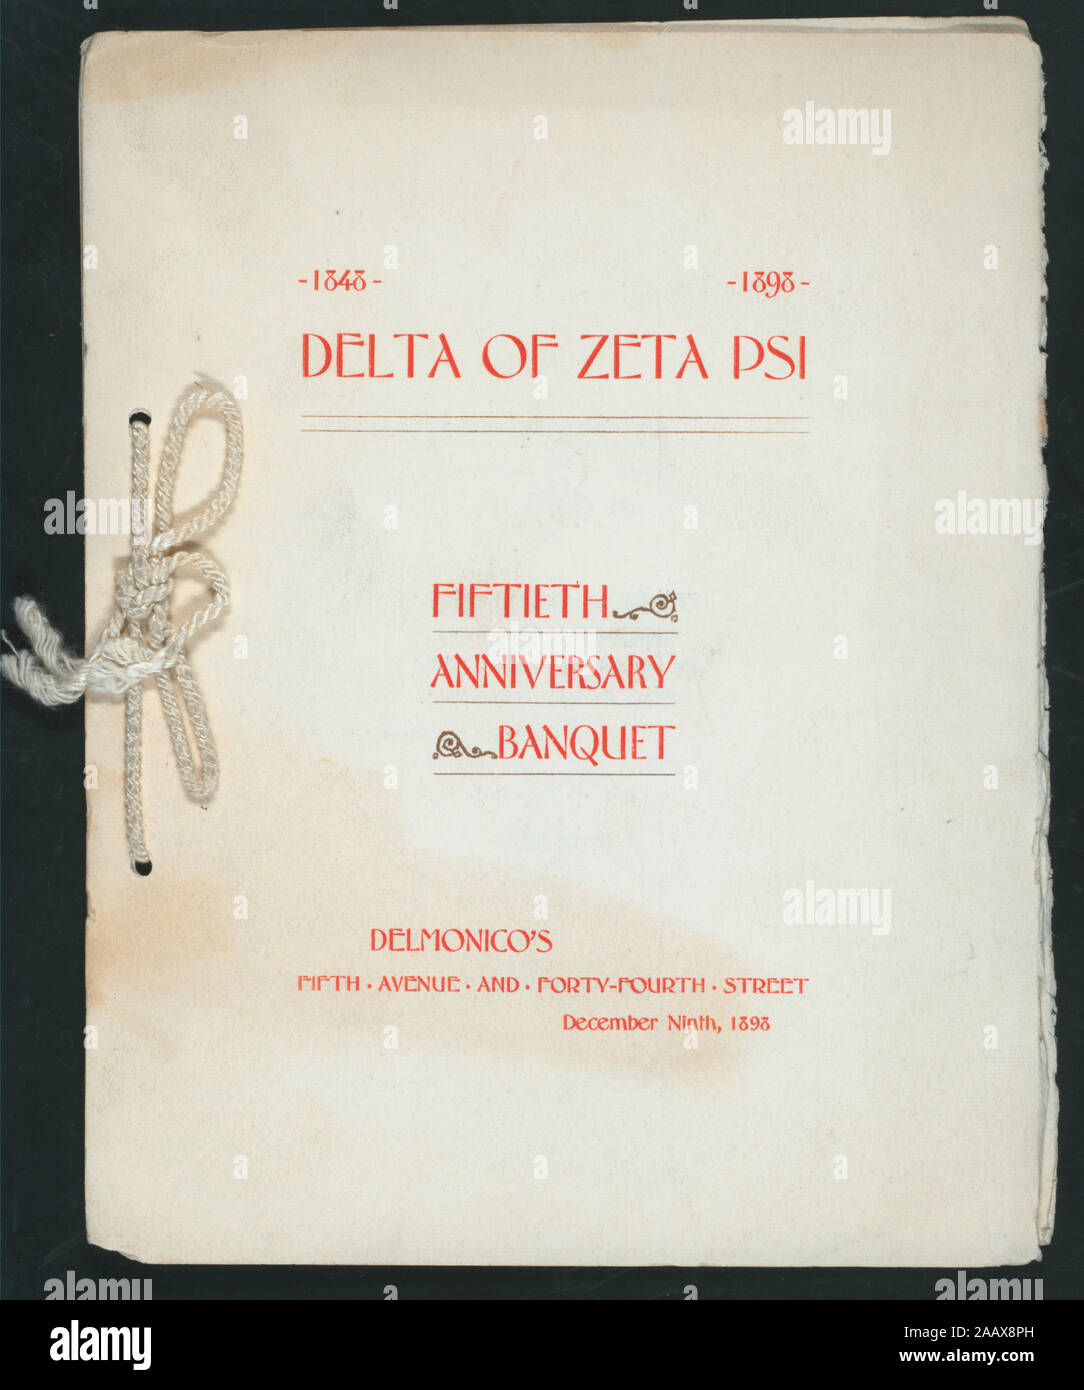 FIFTIETH ANNIVERSARY BANQUET (held by) DELTA OF ZETA PSI (at) DELMONICO,S (NY) (REST;) RED PRINT; WHITE CORD; ILLUS OF A BUILDING ON BACK COVER; TOASTS; FIFTIETH ANNIVERSARY BANQUET [held by] DELTA OF ZETA PSI [at] DELMONICO,S [NY] (REST;) Stock Photo